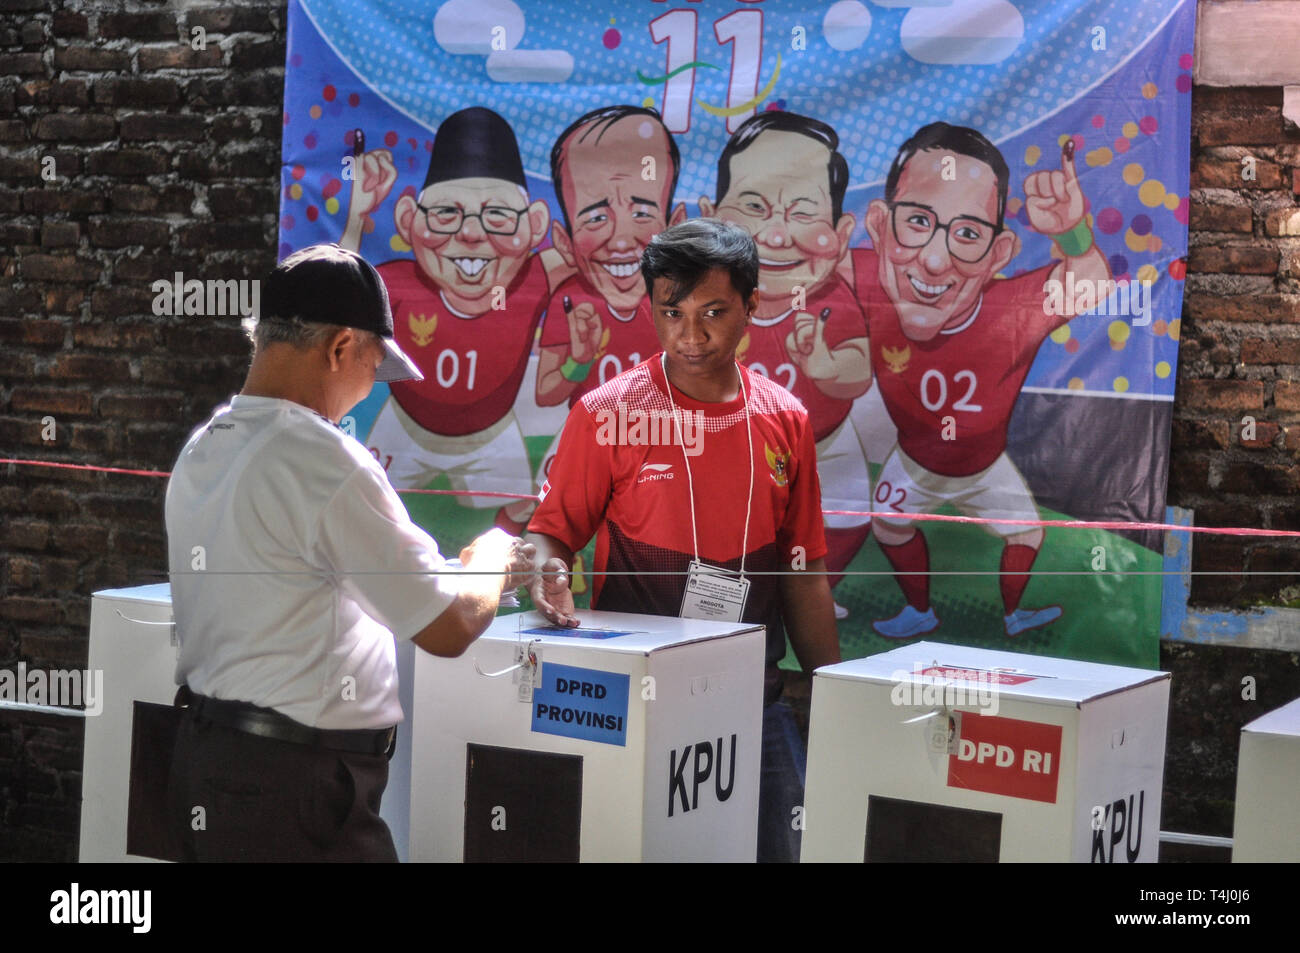 Yogyakarta, INDONESIA. 17th Apr, 2019. Voters cast their votes as caricatures of presidential candidates and their candidate pairs hung on the walls at polling stations in Yogyakarta, Indonesia, Wednesday, April 17 2019. Millions of Indonesians voted in presidential and legislative elections with former presidential candidates Joko Widodo and Prabowo Subianto Suharto's son-in-law led Indonesia for 32 years. Credit: Slamet Riyadi/ZUMA Wire/Alamy Live News Stock Photo